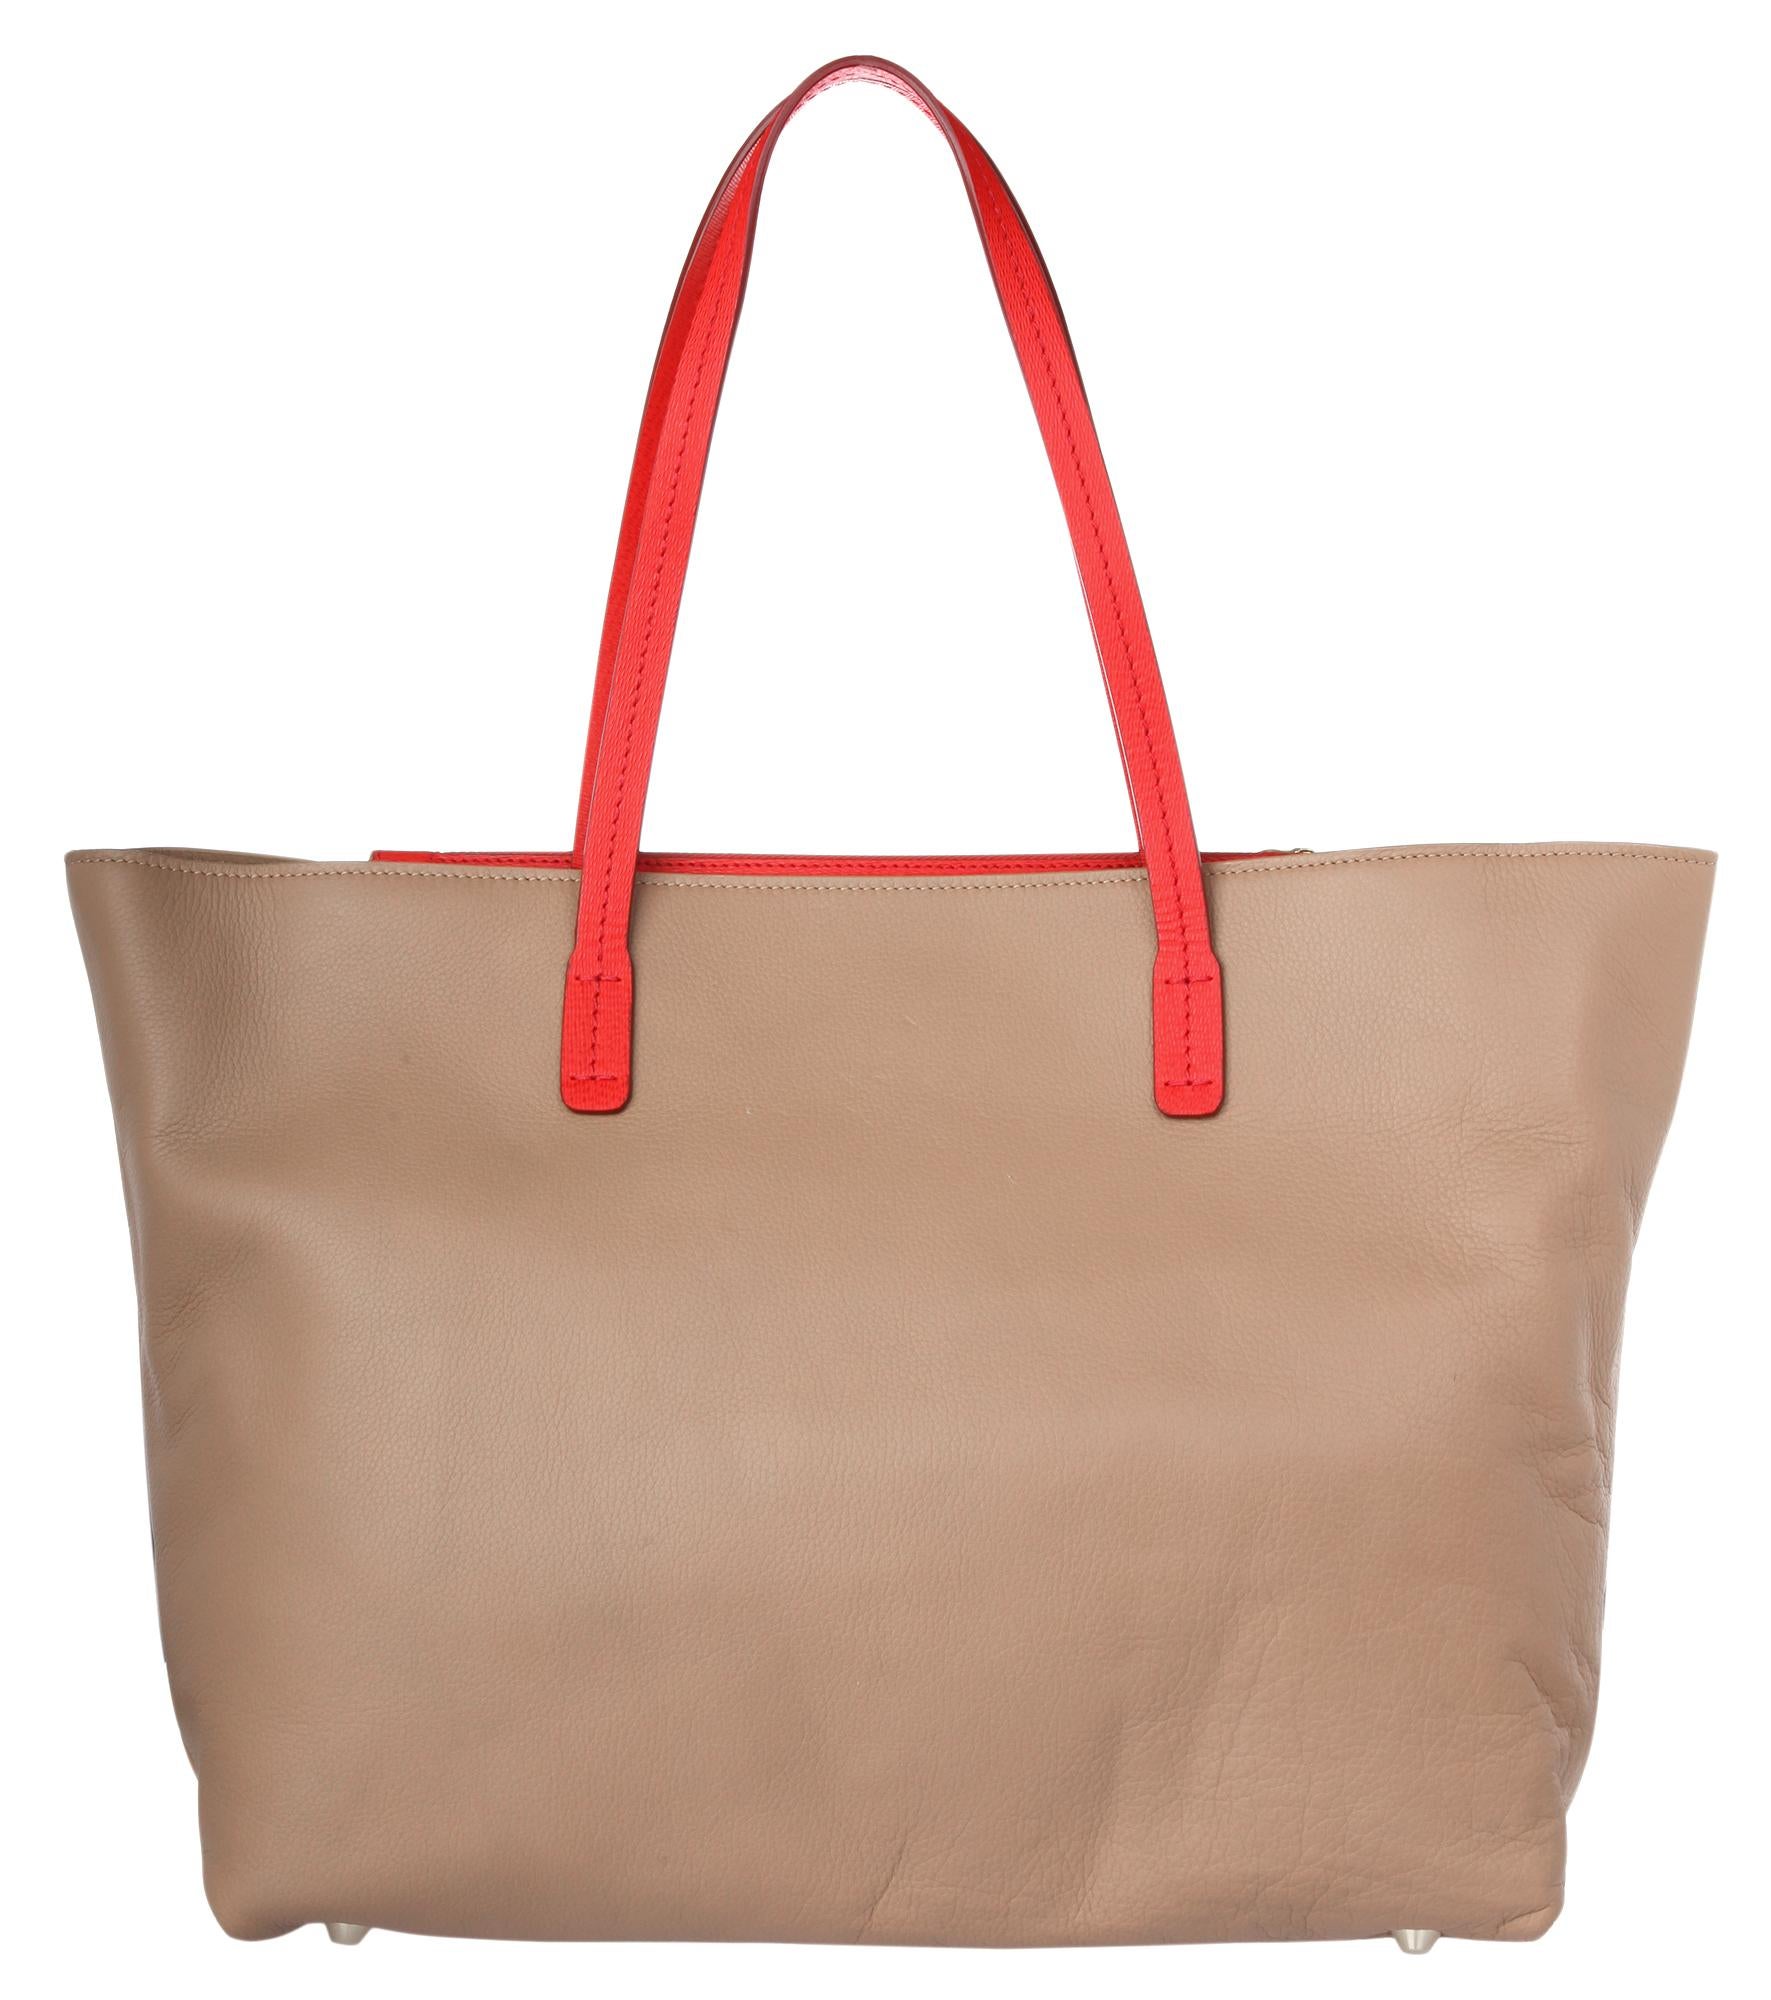 Item number: LAN007-BERE
Compartments: 1 main compartment, 2 pockets; Exterior: 1 zipper pocket
Color: beige/red
Exterior: calfskin, Lining: 50% cotton, 50% polyester
Closure: snap closure
Size lenght 45 cm, height 30 cm, depth 13 cm
Hardware and